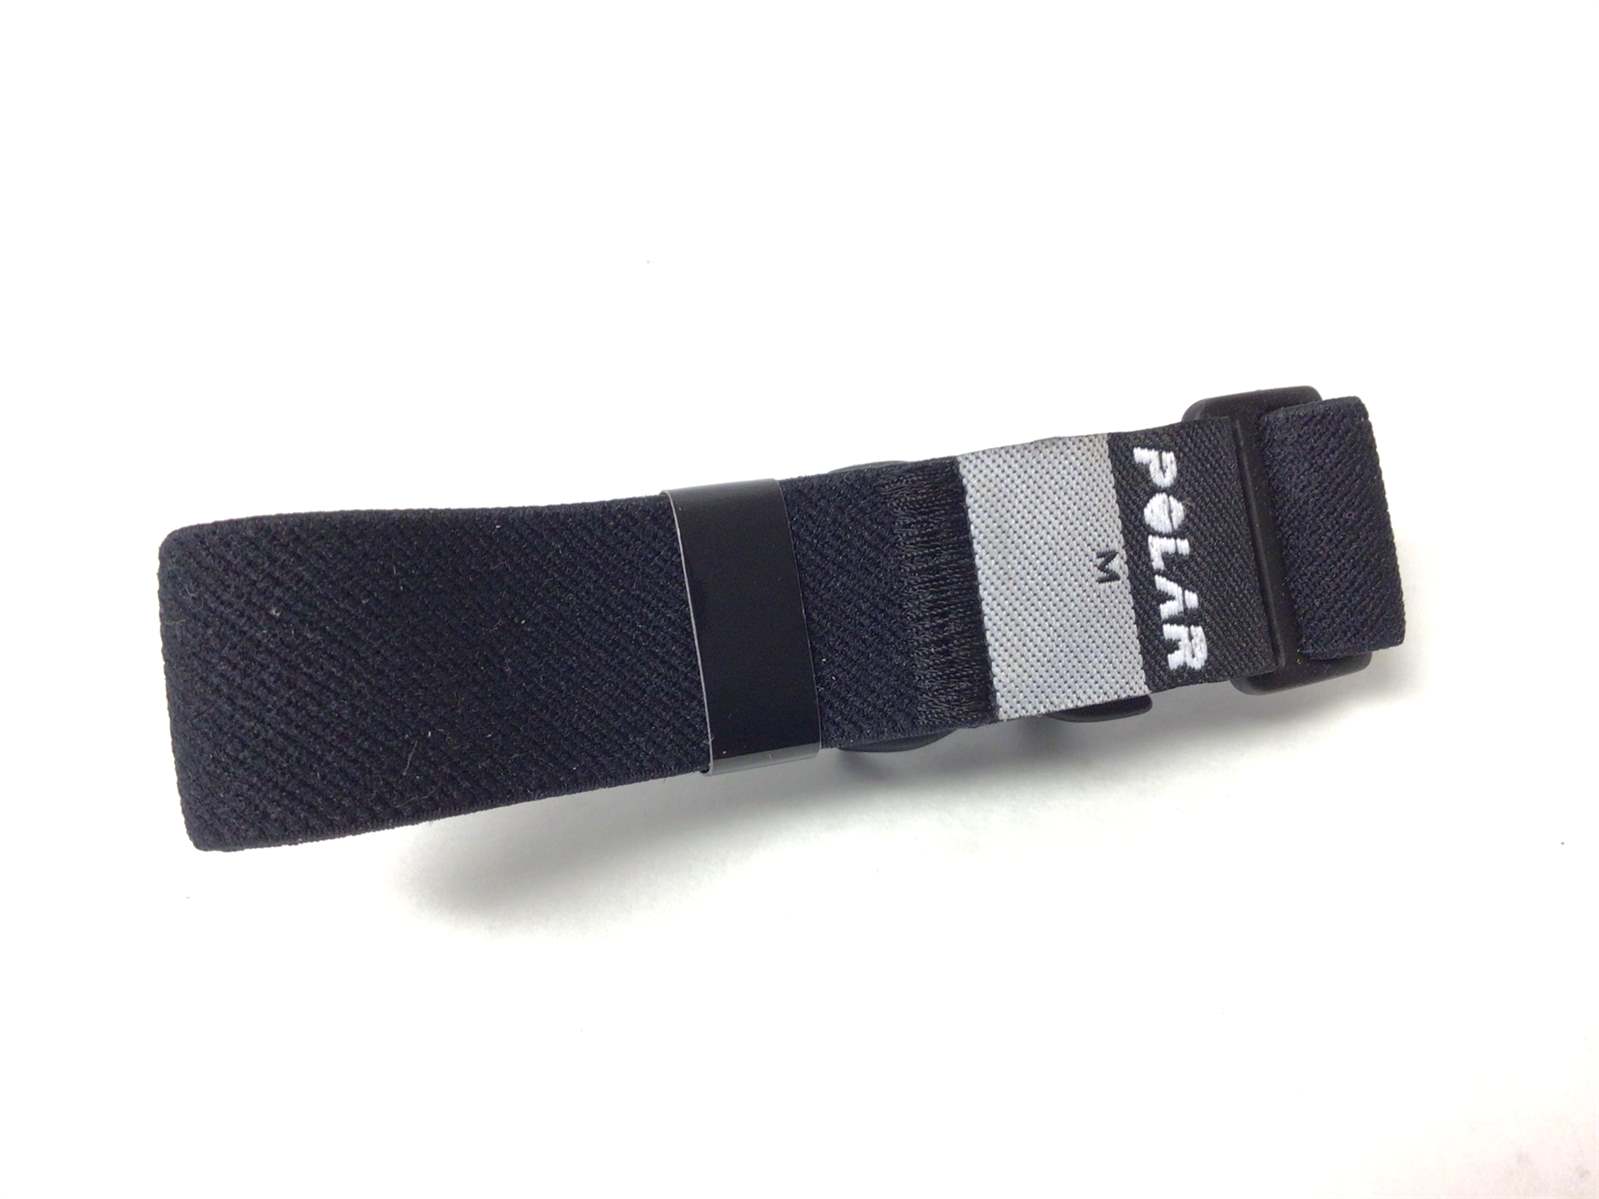 Polar Heart Rate Transmittor Strap (Used)